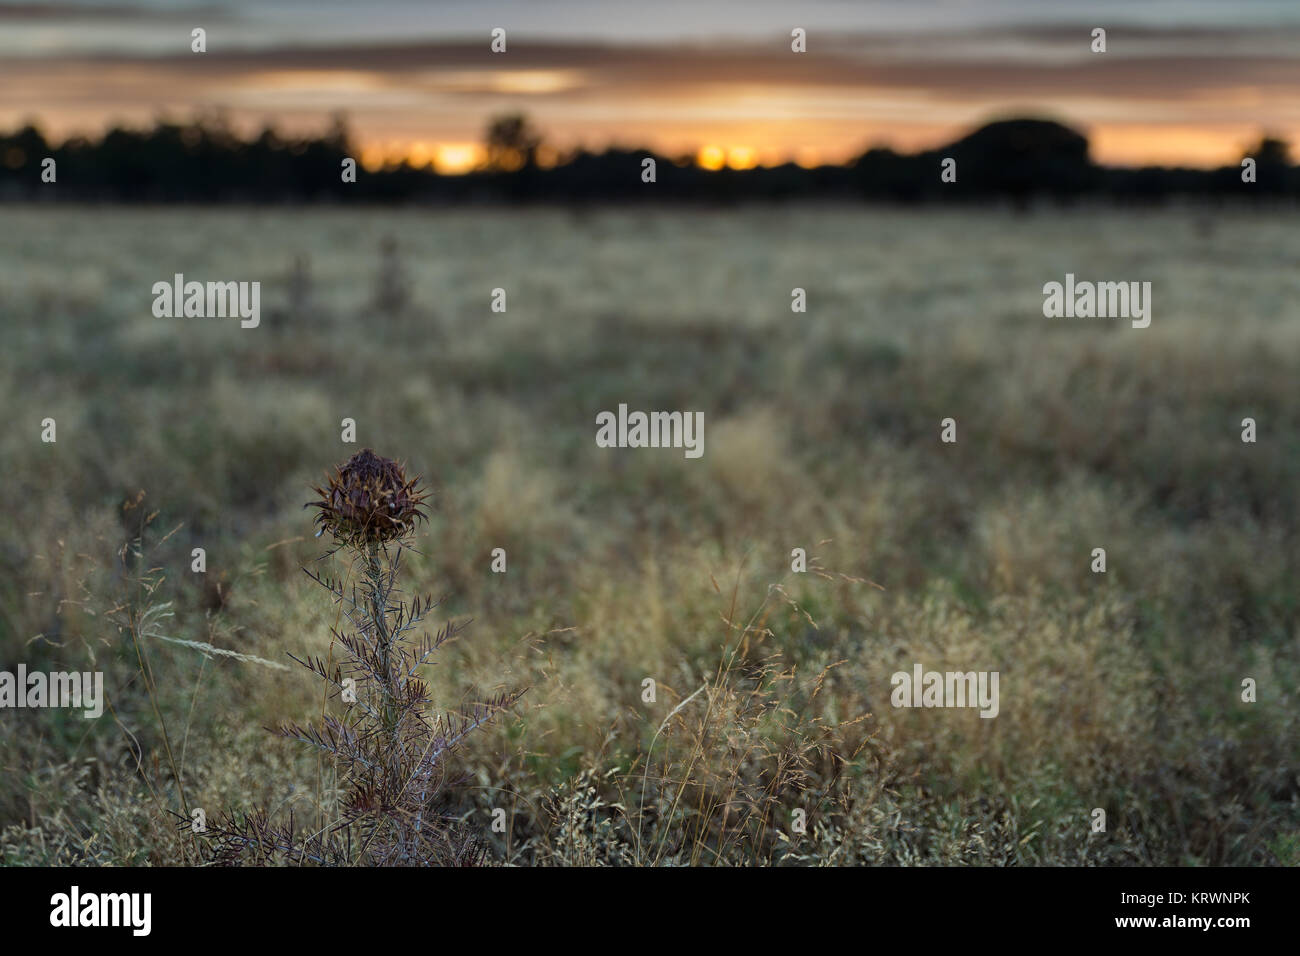 Landscape with a thistle in the foreground, with sunset in the background. Stock Photo